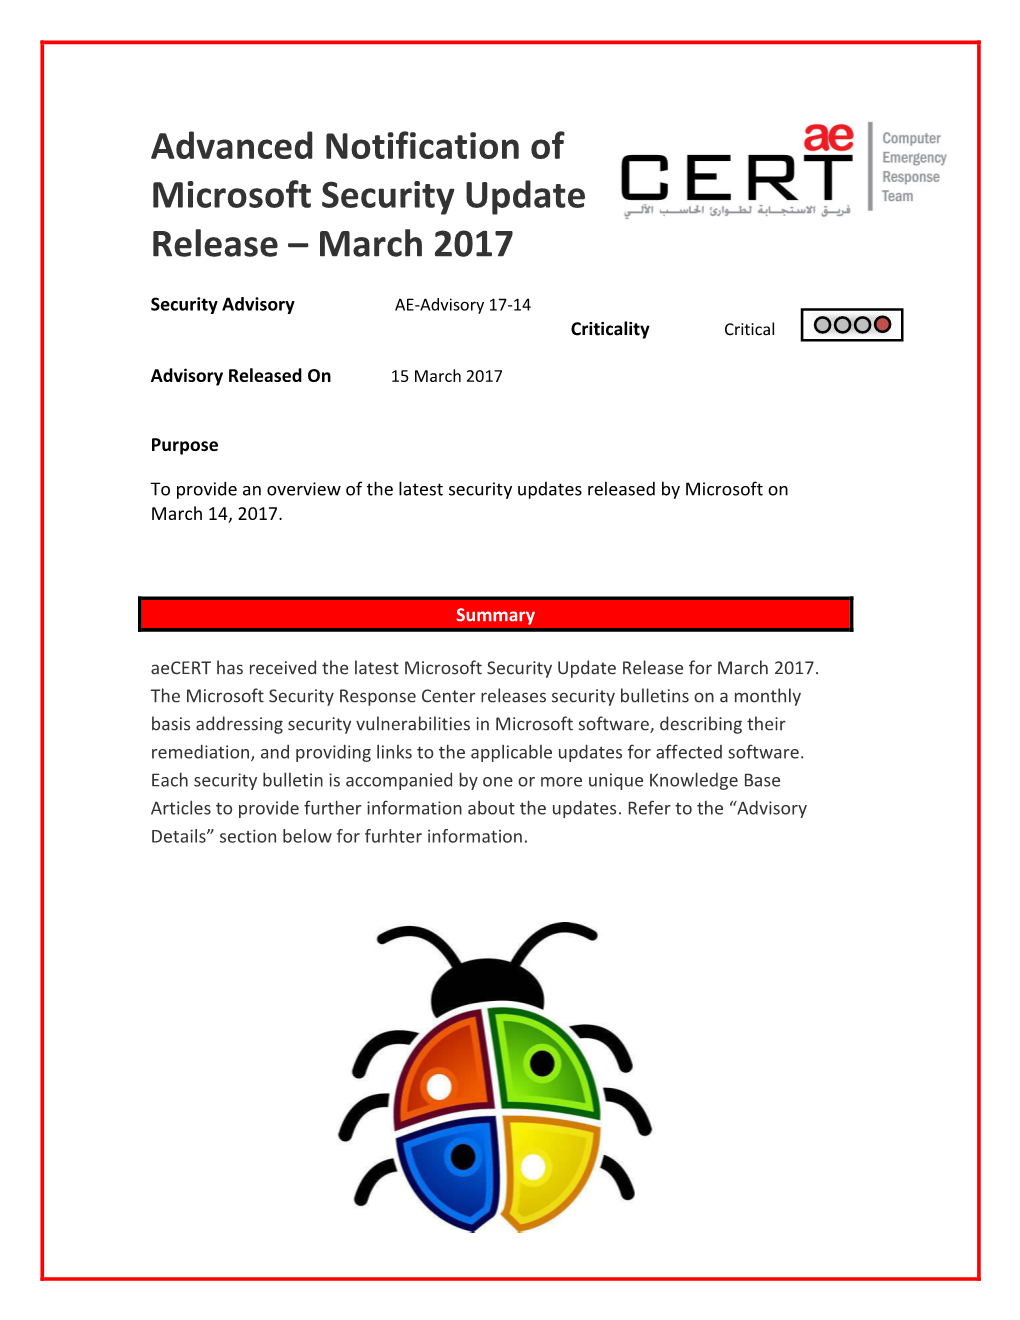 Advanced Notification of Microsoft Security Update Release – March 2017